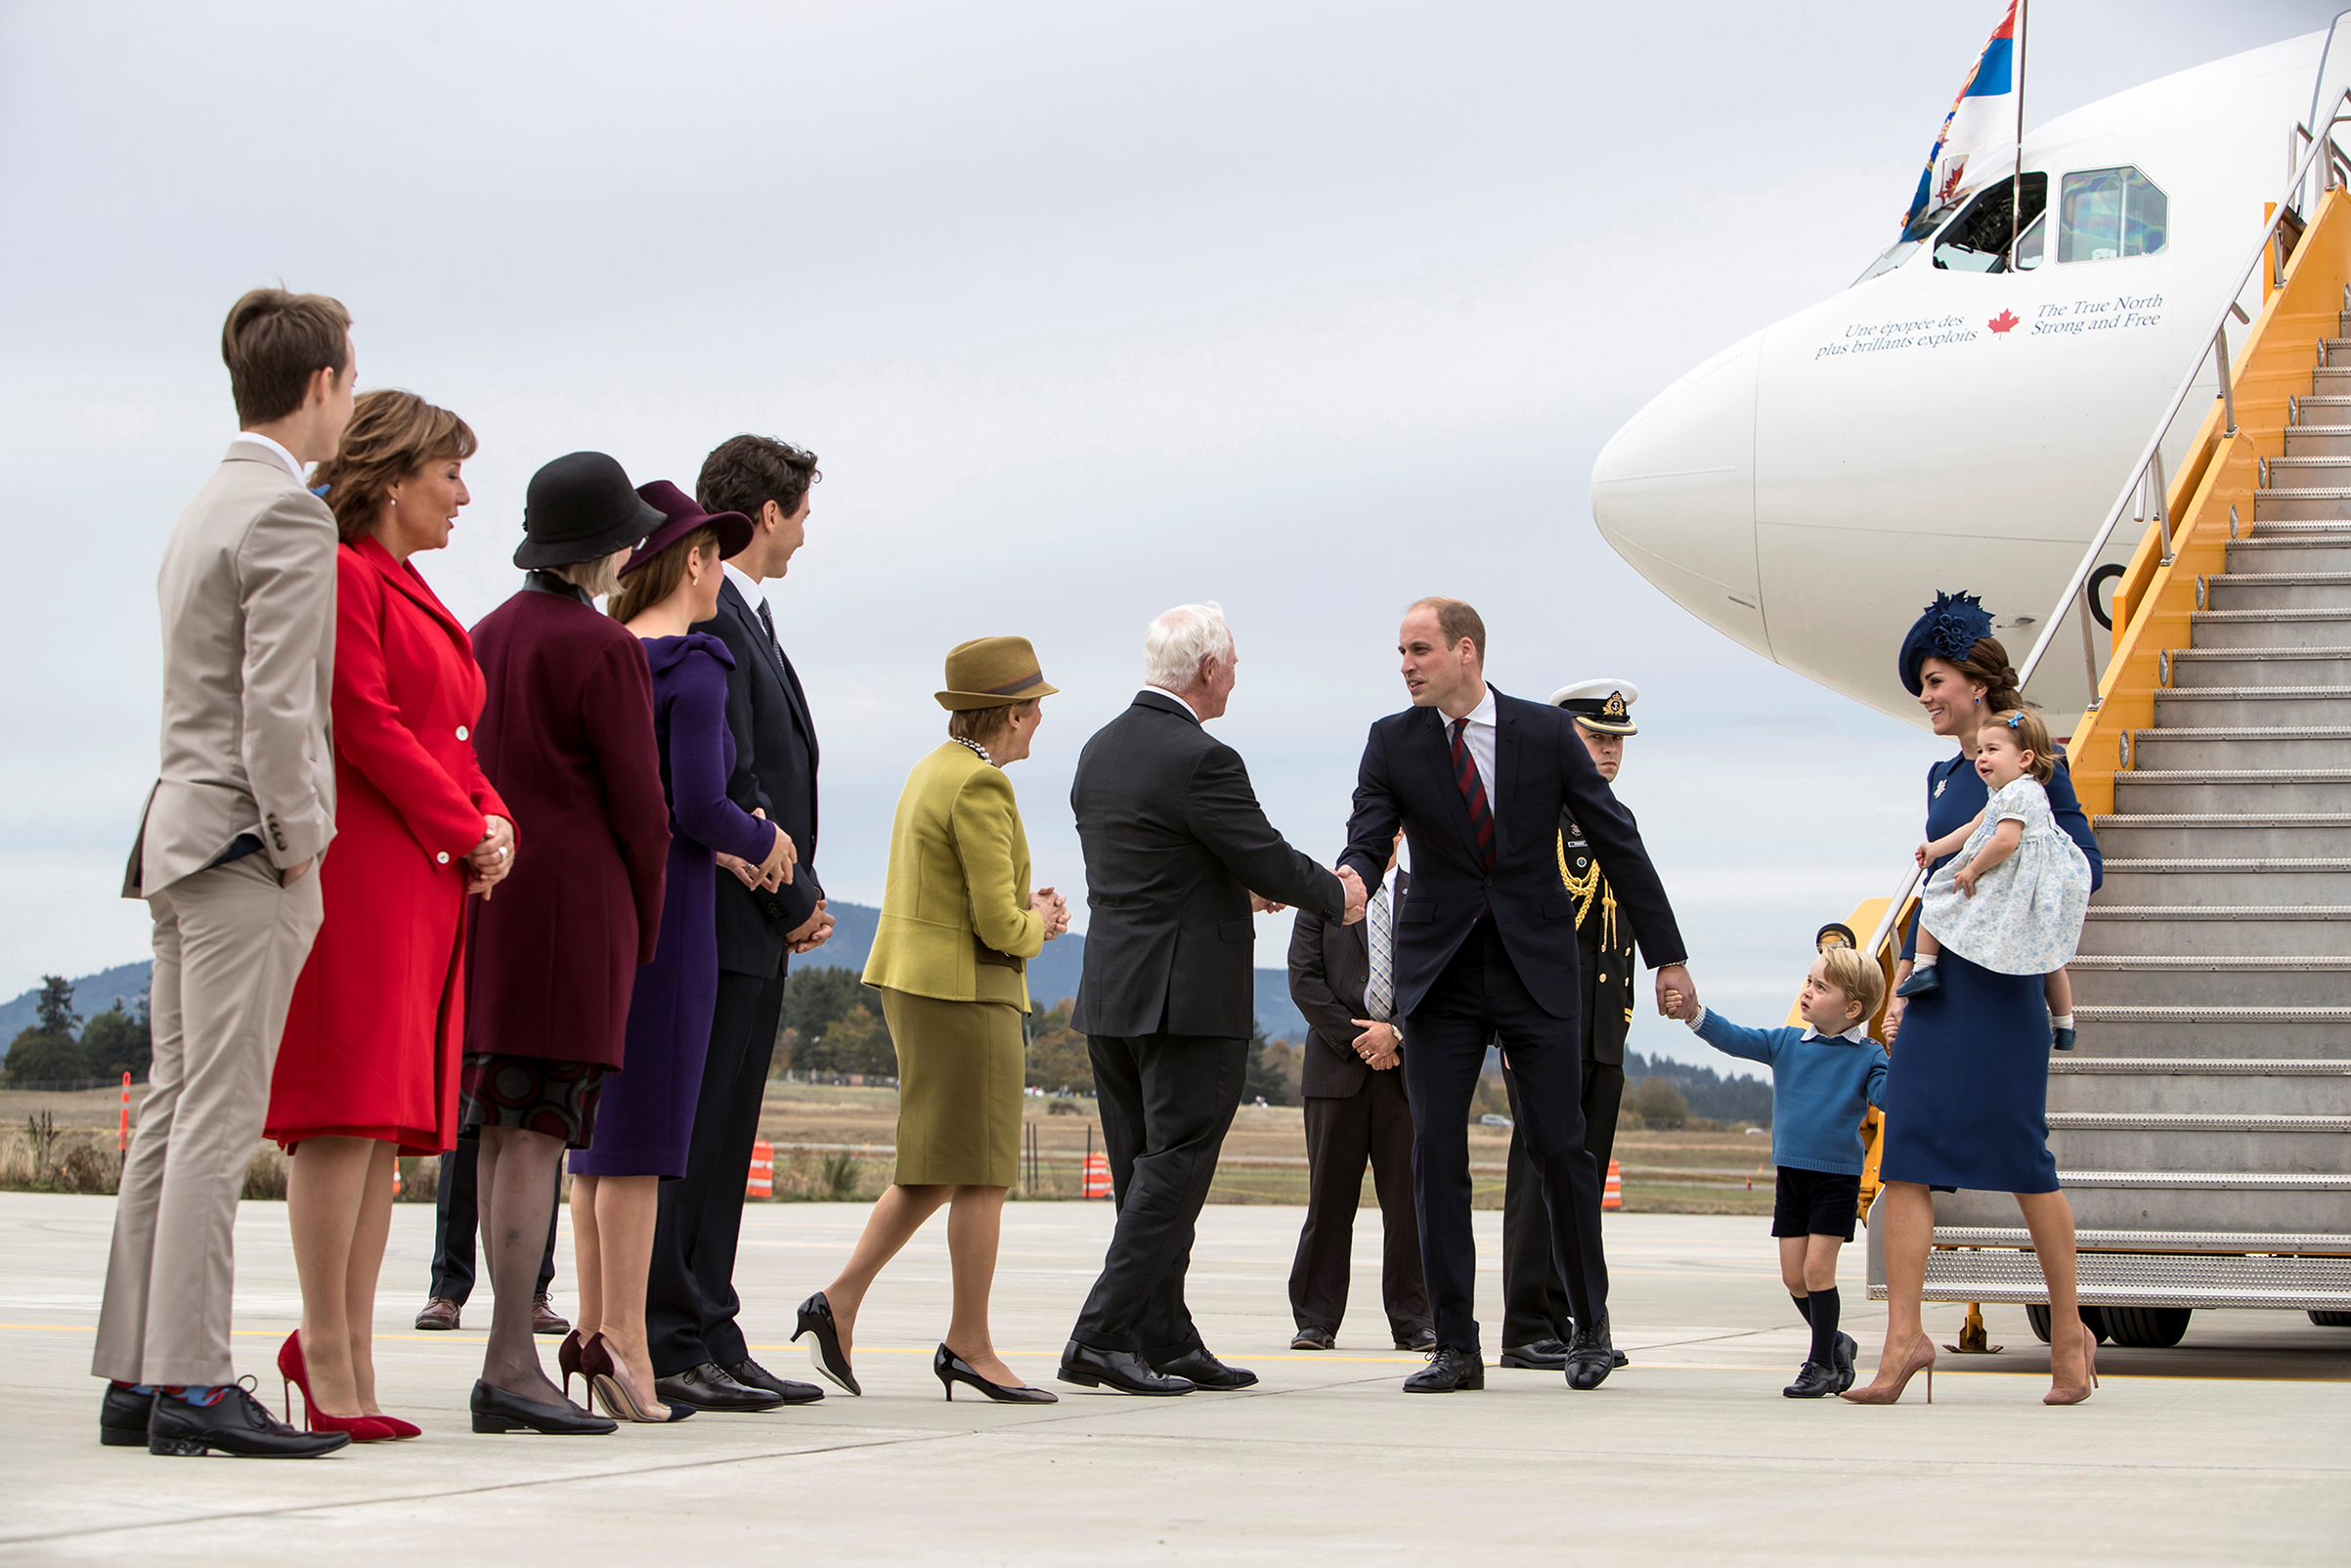 Britain's Prince William, Catherine, Duchess of Cambridge, Prince George and Princess Charlotte arrive at the Victoria International Airport for the start of their eight-day royal tour to Canada in Victoria, British Columbia, on Sept. 24, 2016.